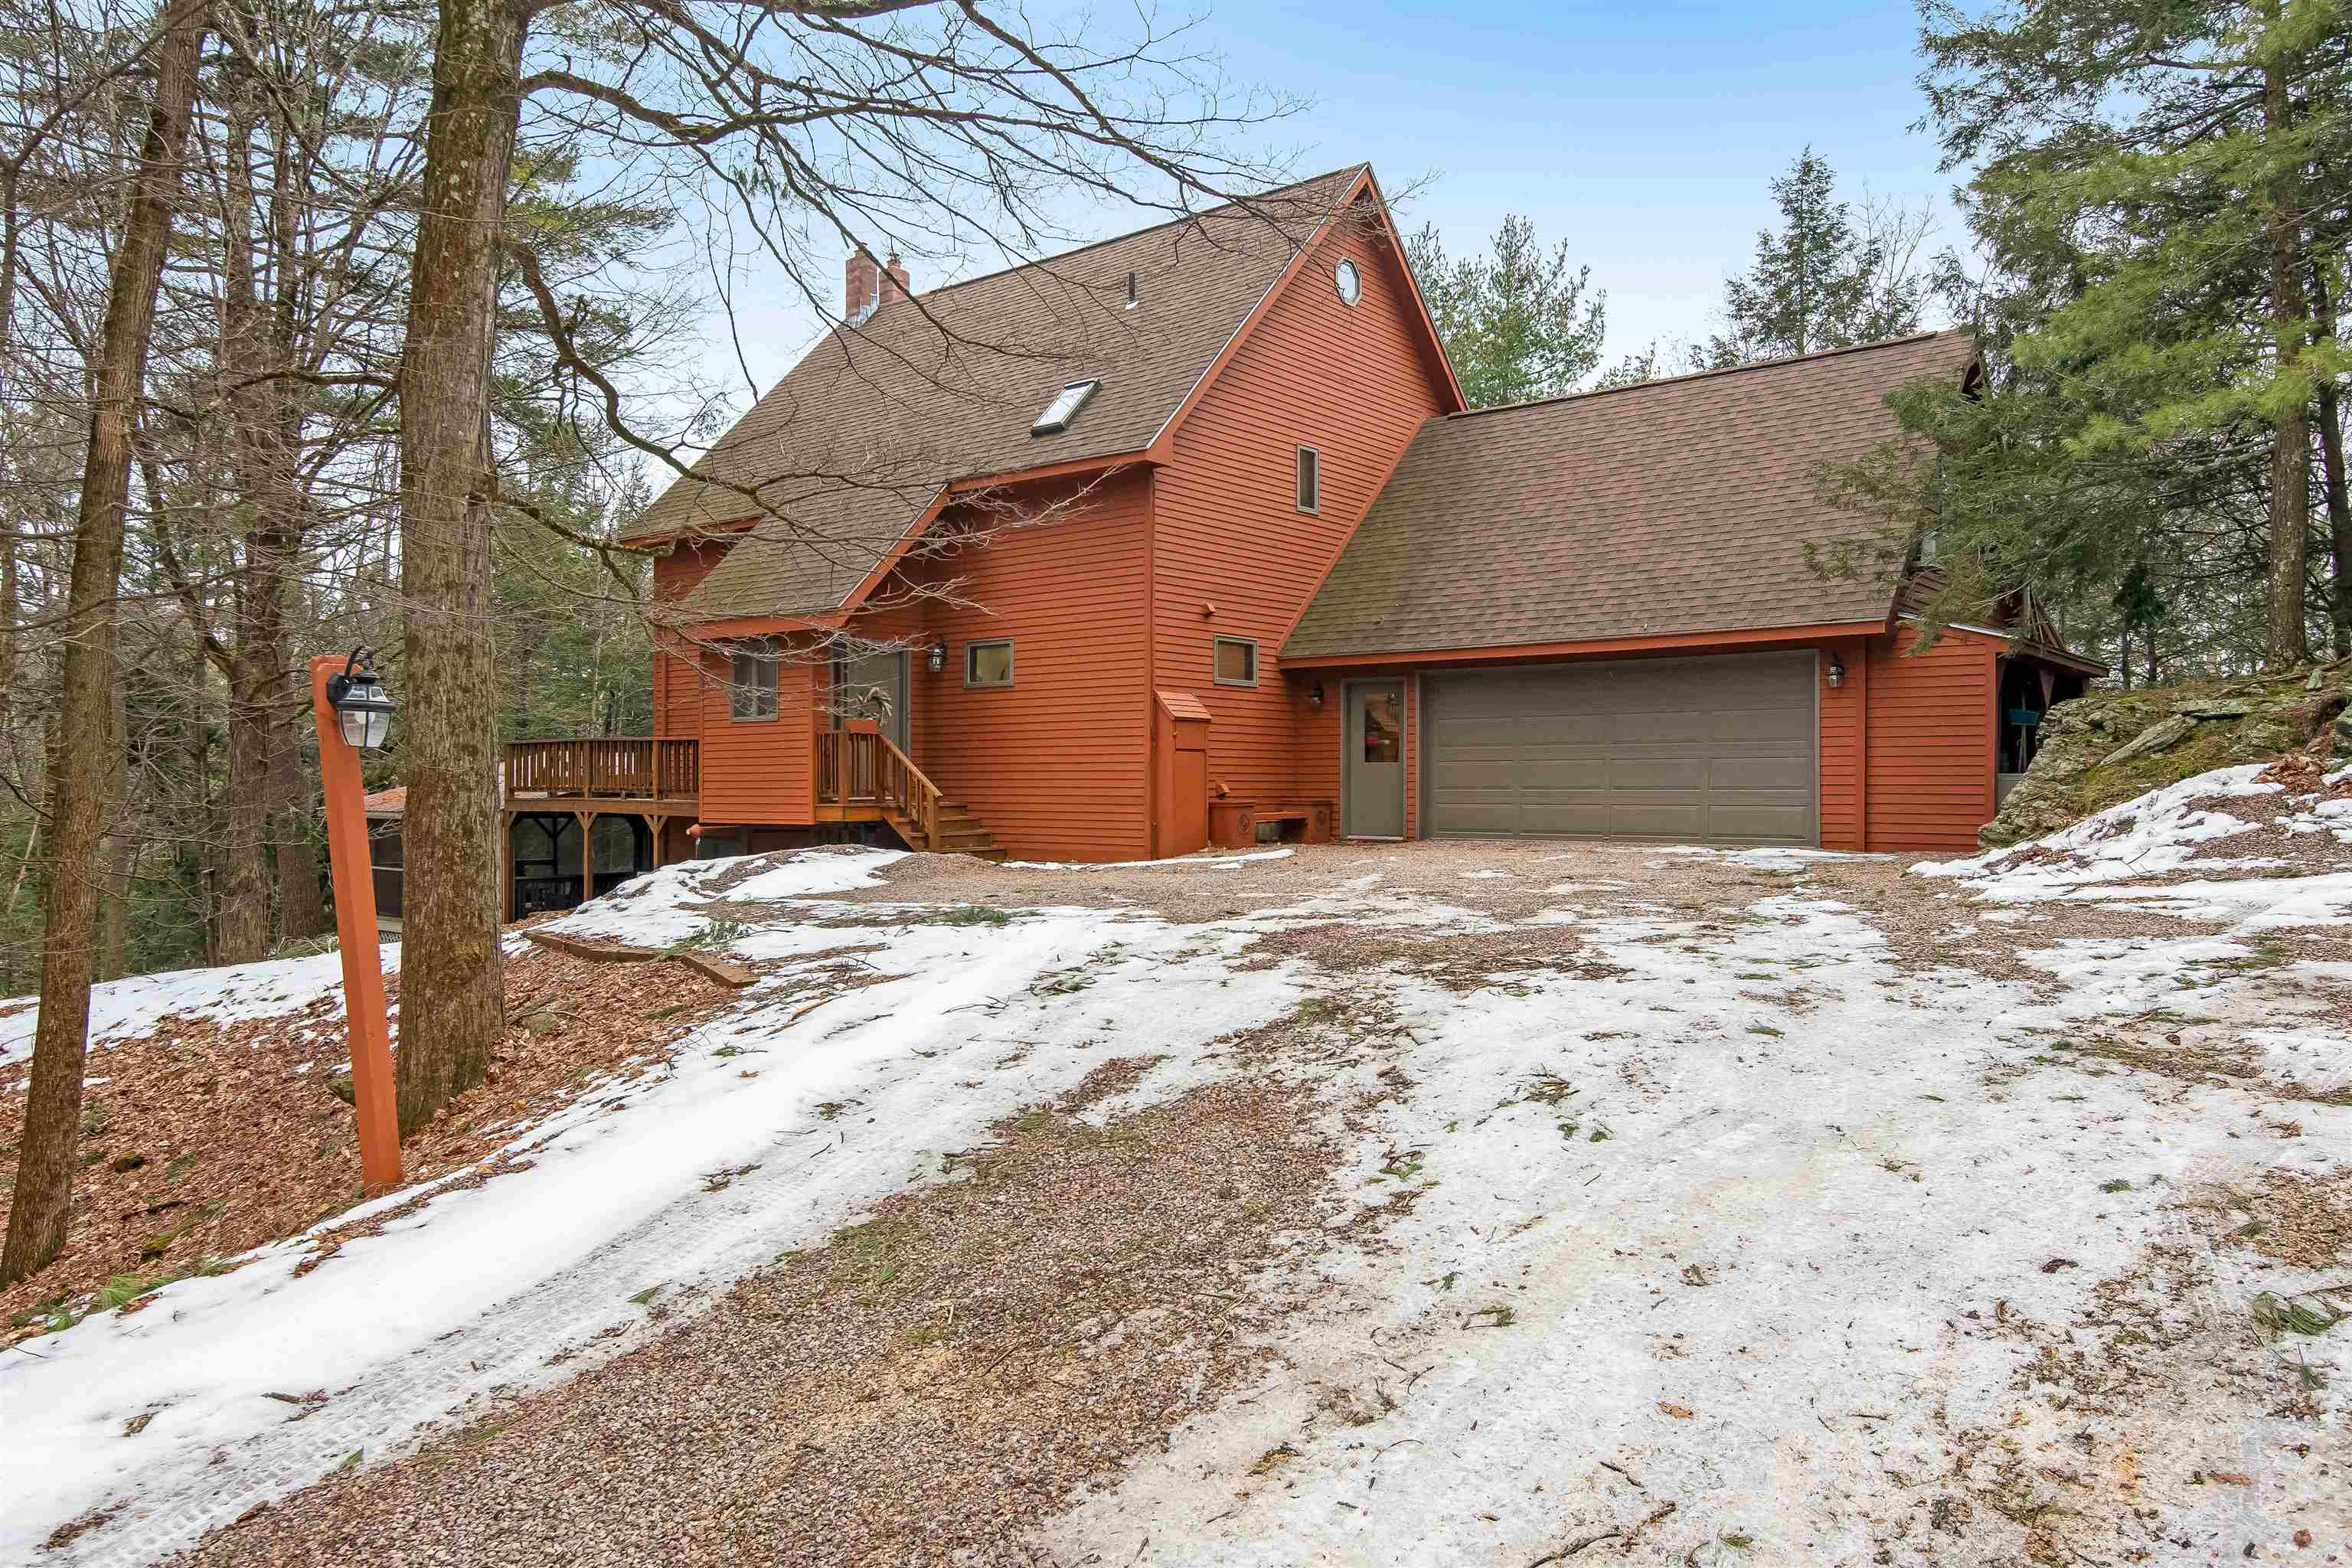 Enjoy luxurious, private Vermont living here!